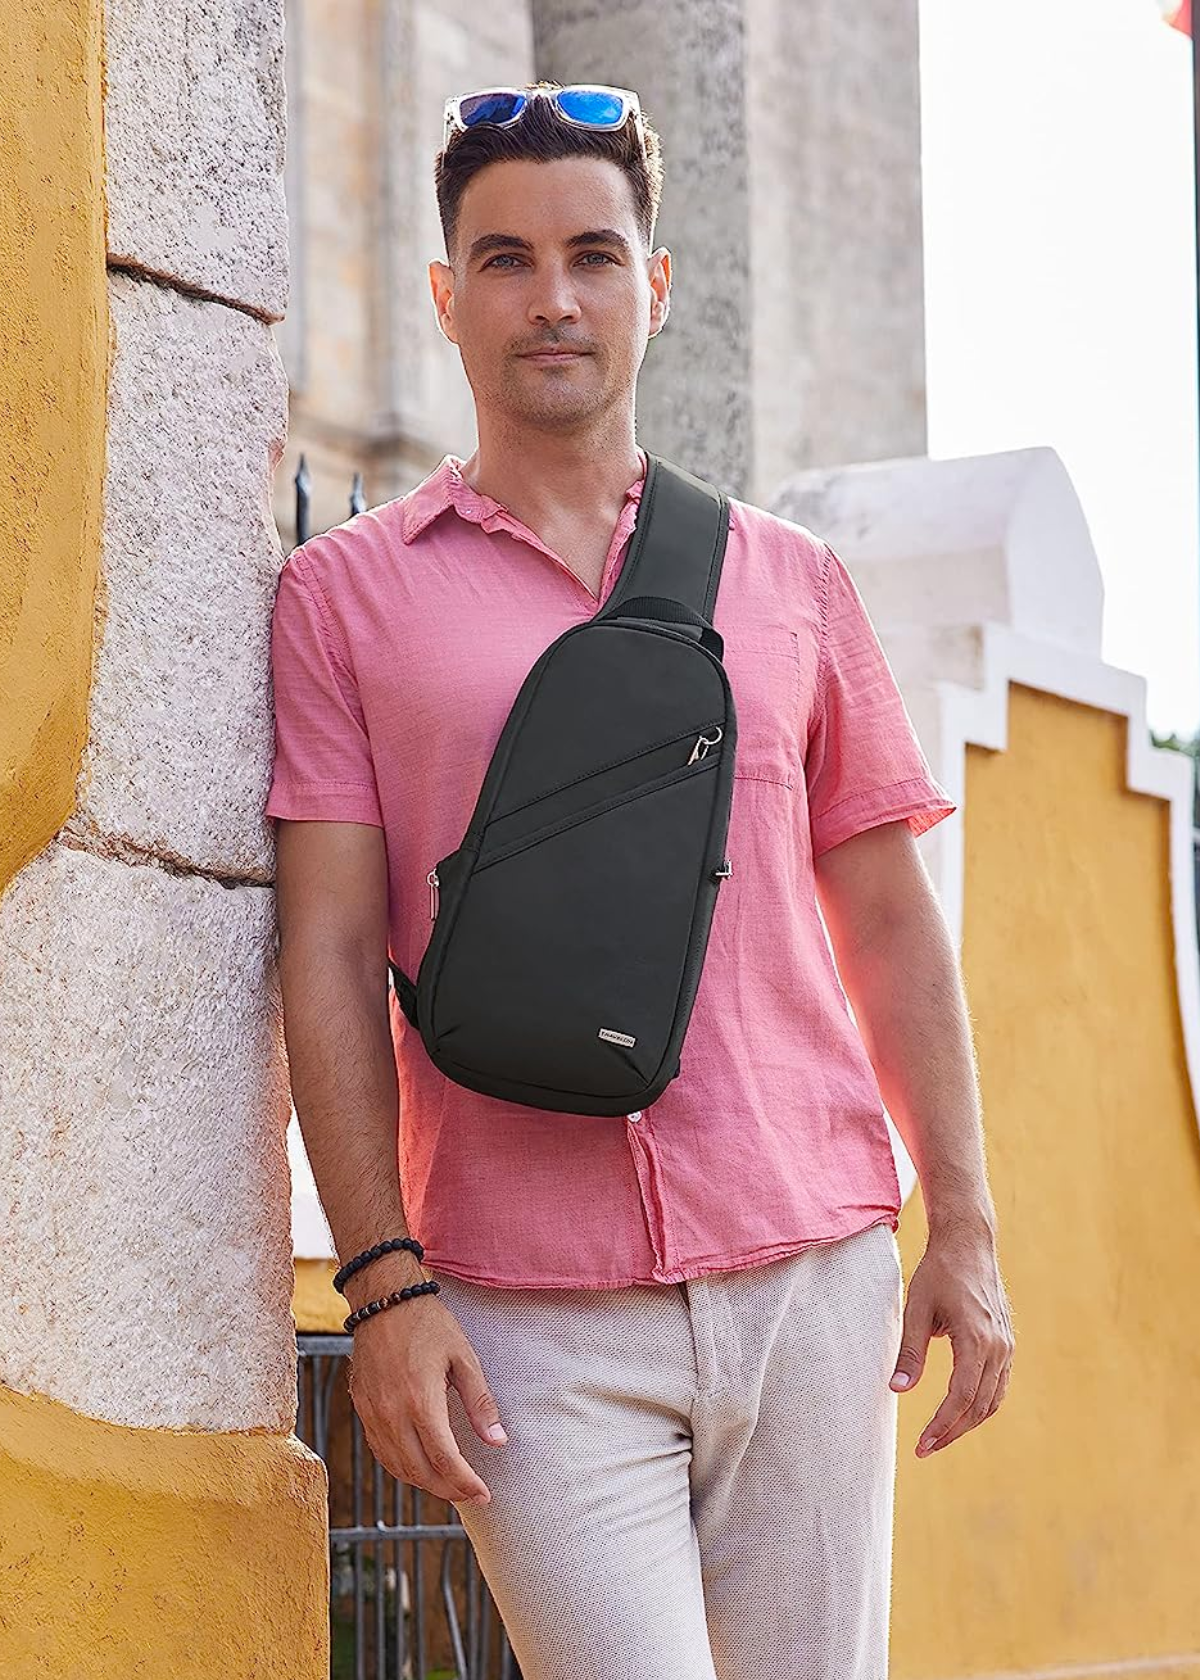 Travelon Anti Theft Classic Sling Bag Review: Features and Benefits